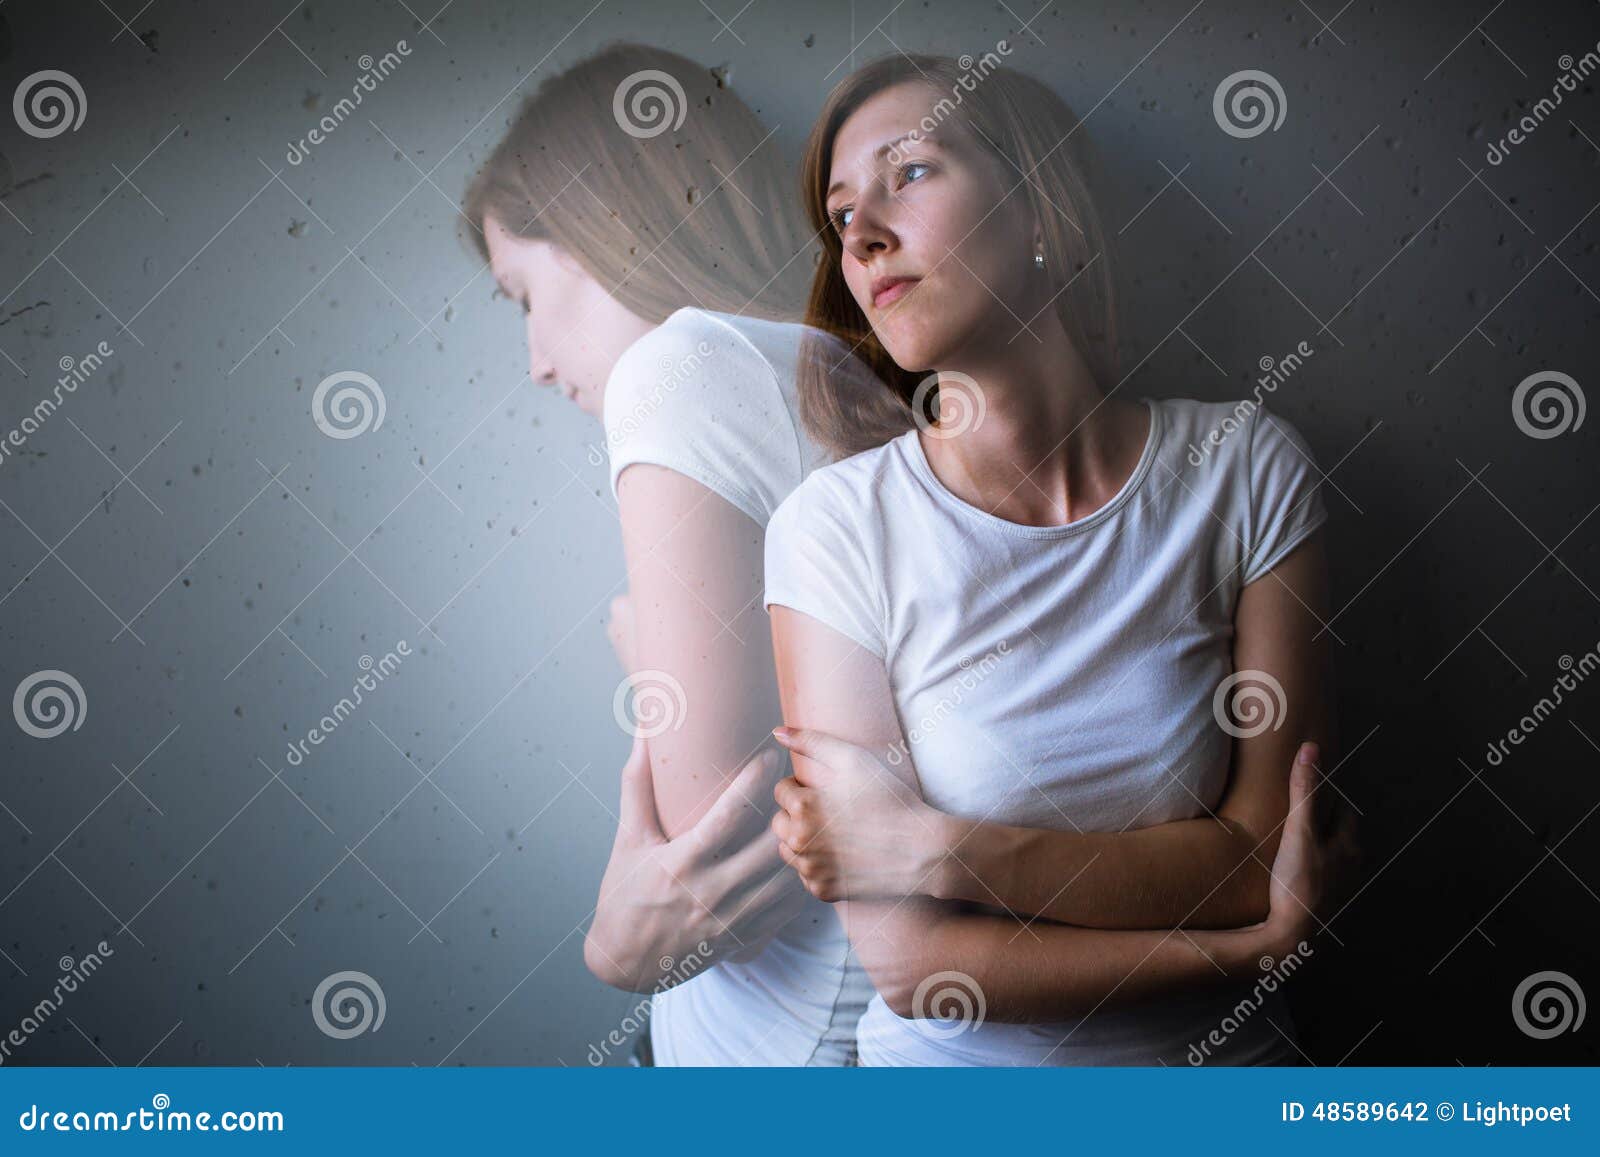 young woman suffering from a severe depression/anxiety